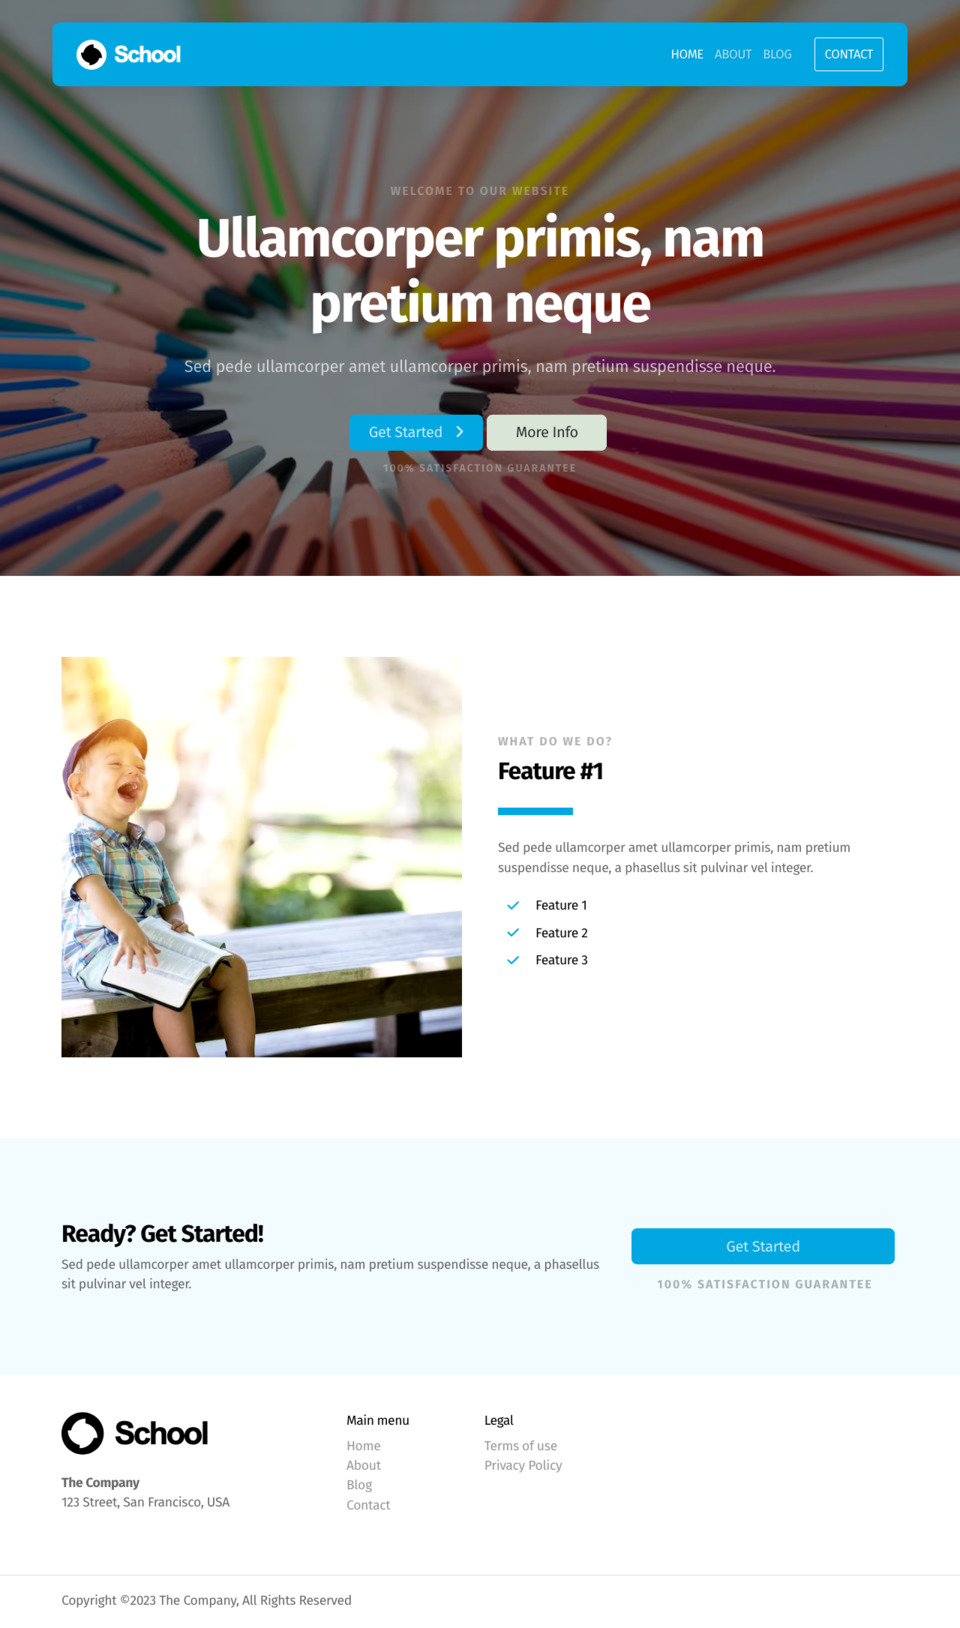 School Website Template - Ideal for schools, education centers, learning institutions, kindergartens, elementary schools, middle schools, high schools, language schools, and any educational organization.